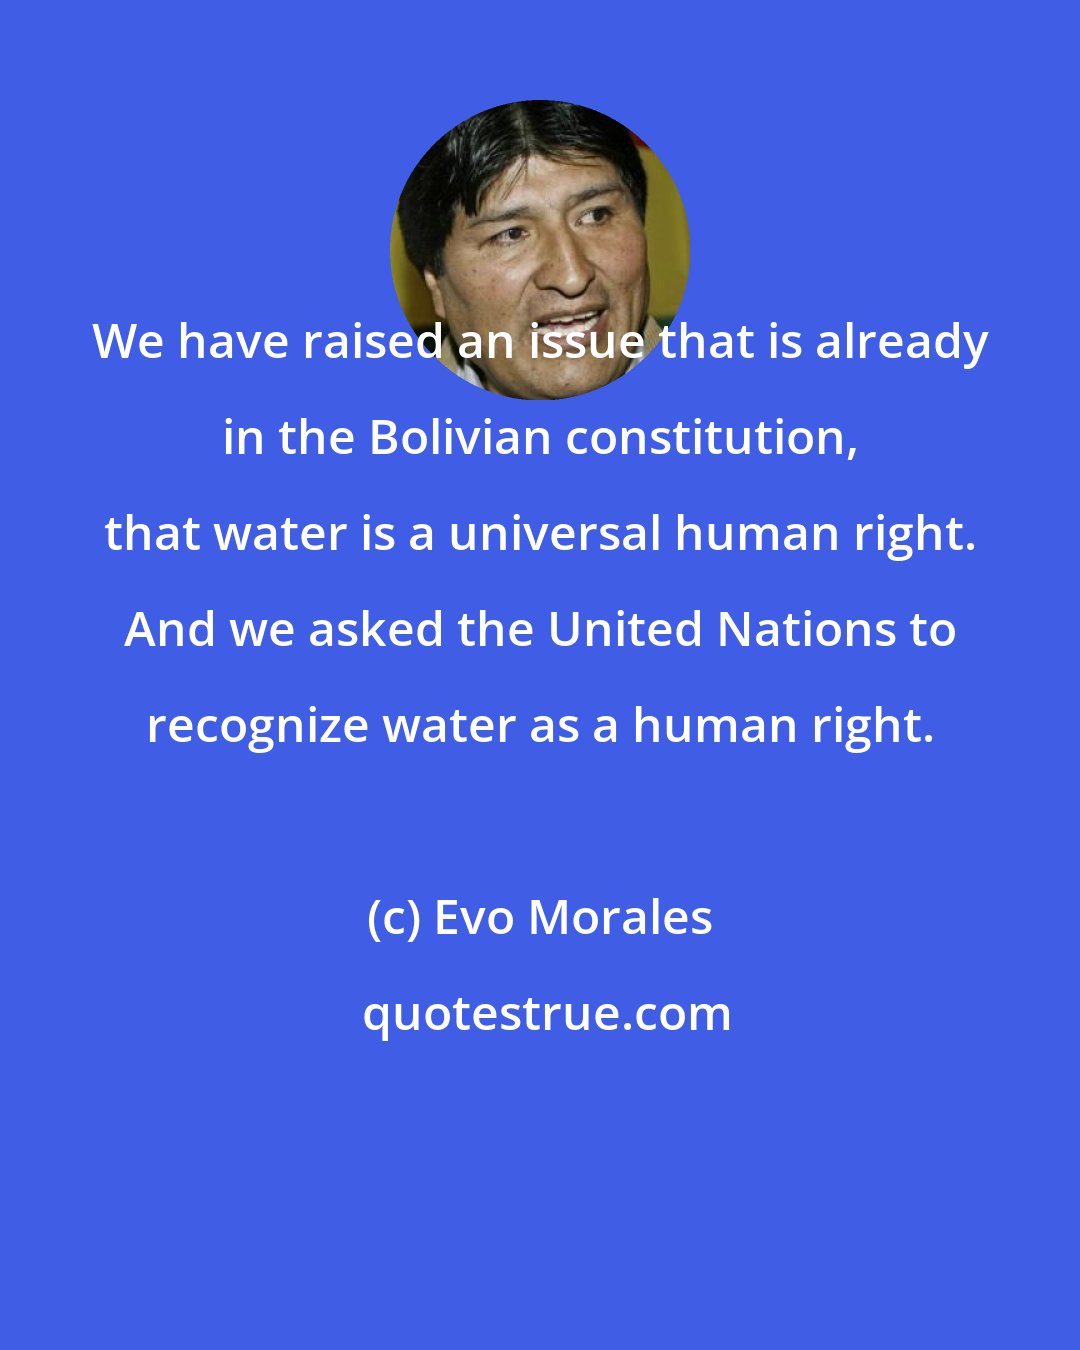 Evo Morales: We have raised an issue that is already in the Bolivian constitution, that water is a universal human right. And we asked the United Nations to recognize water as a human right.